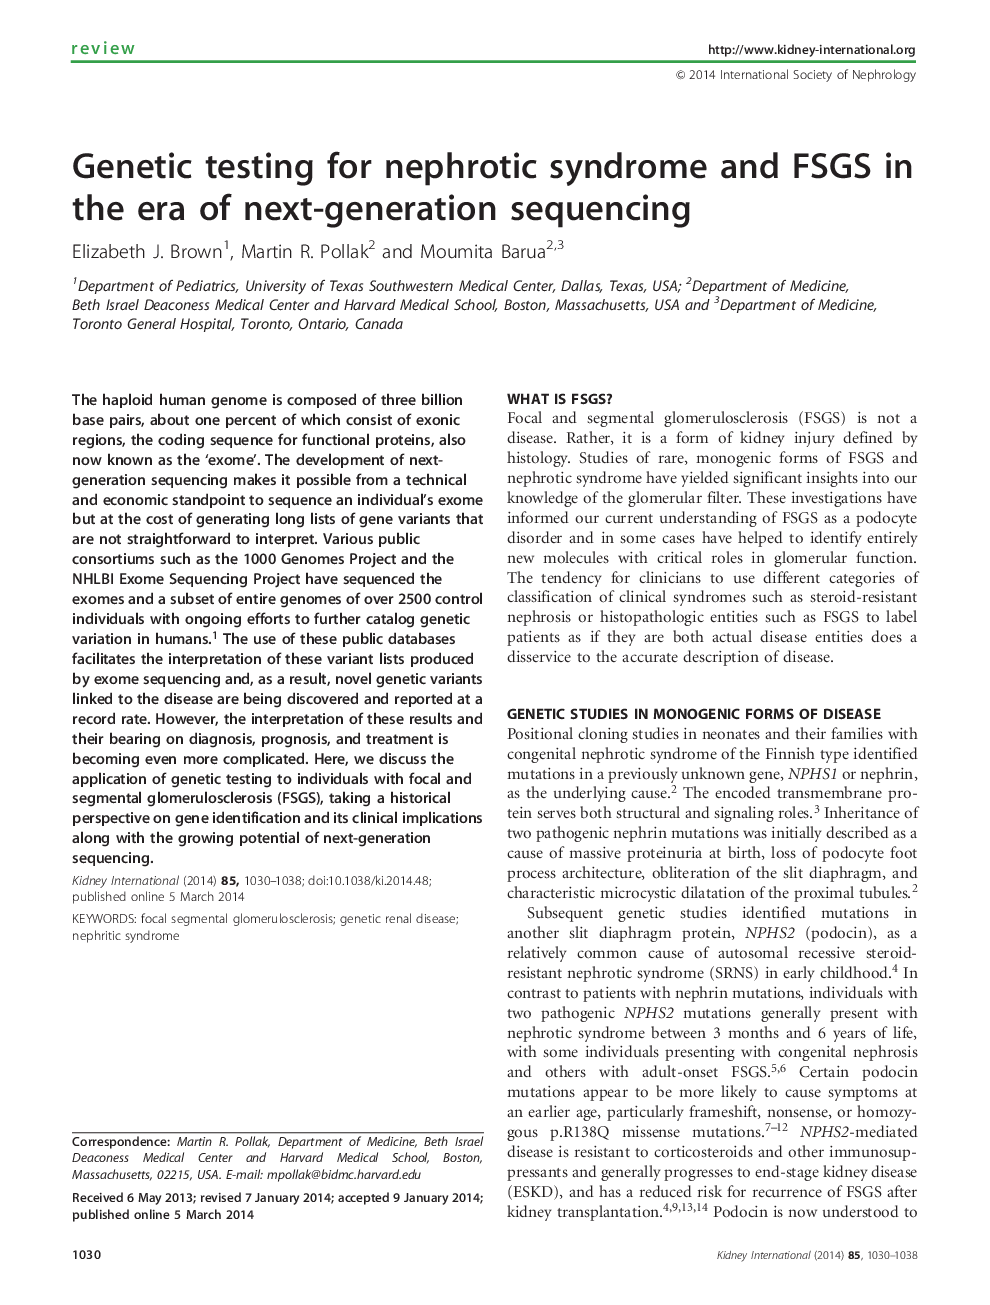 Genetic testing for nephrotic syndrome and FSGS in the era of next-generation sequencing